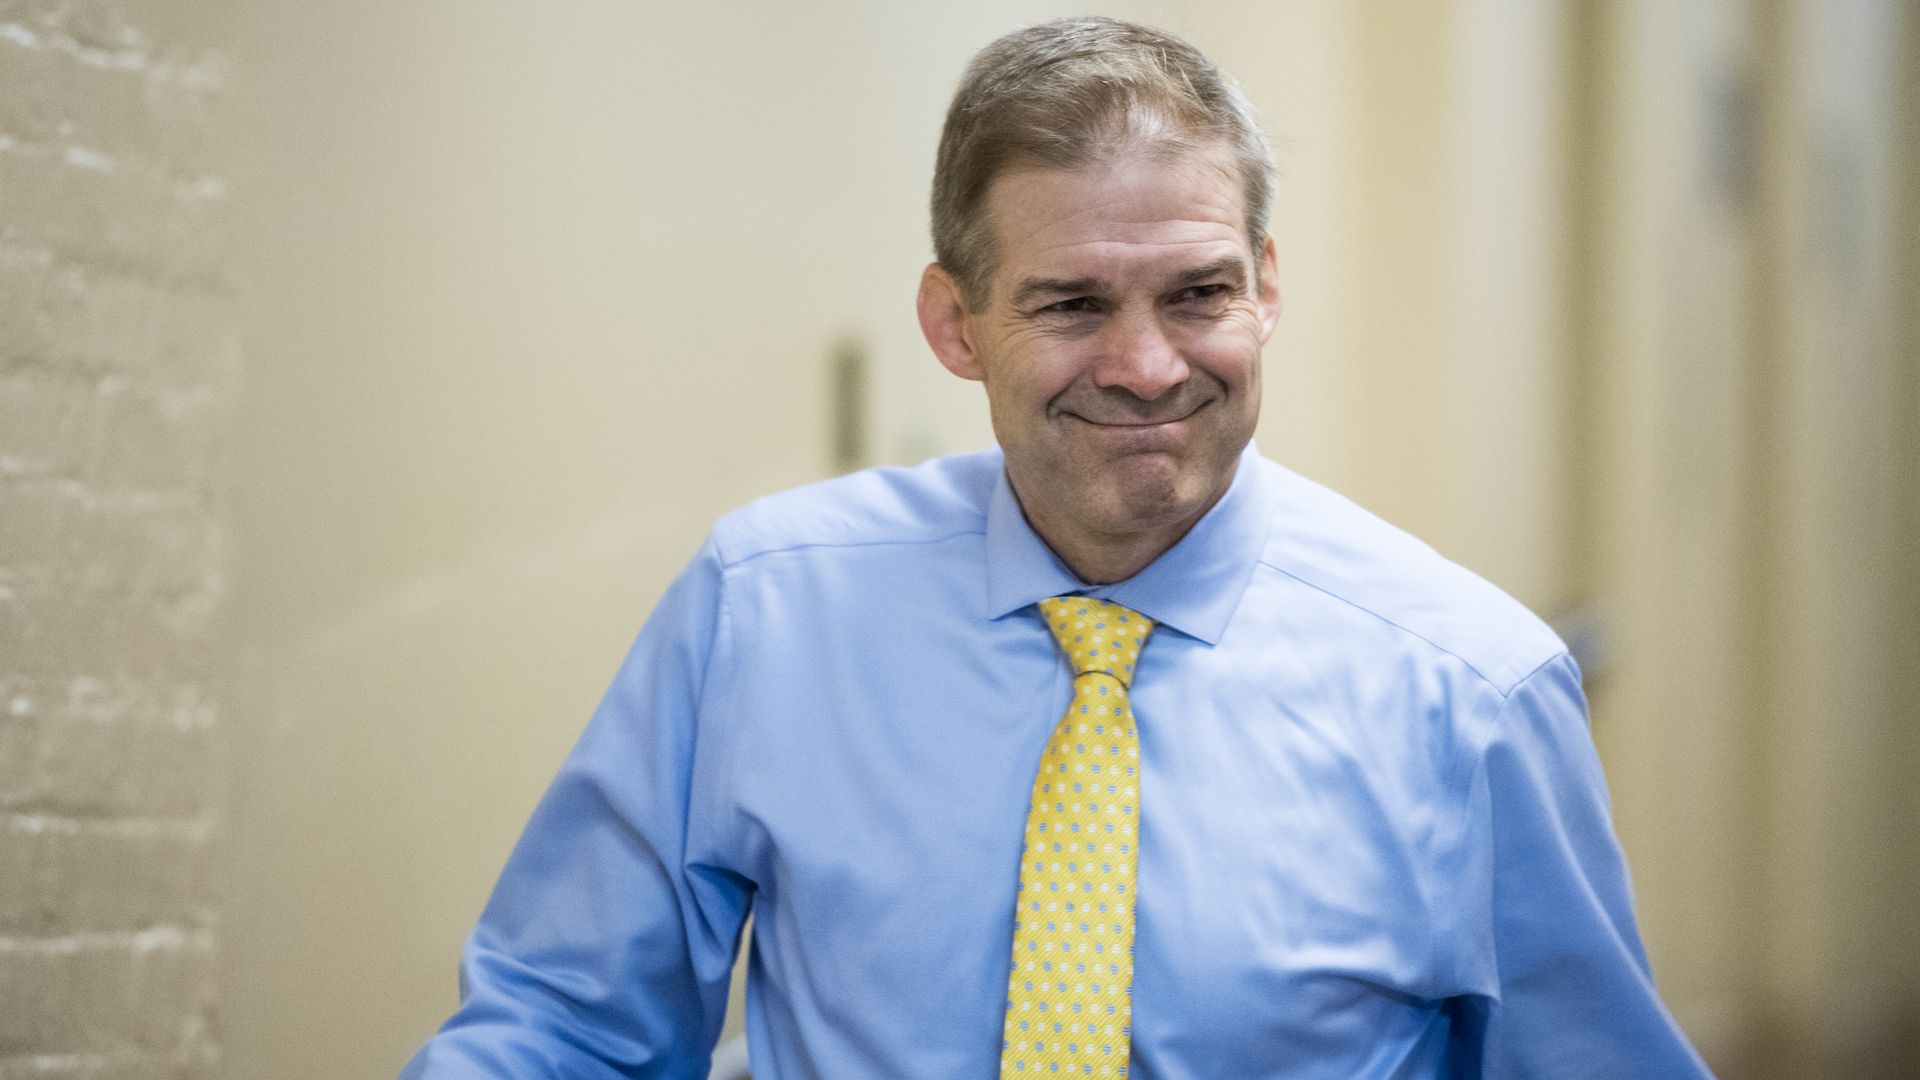 Freedom Caucus founder Jim Jordan is running for House Speaker - Axios1920 x 1080